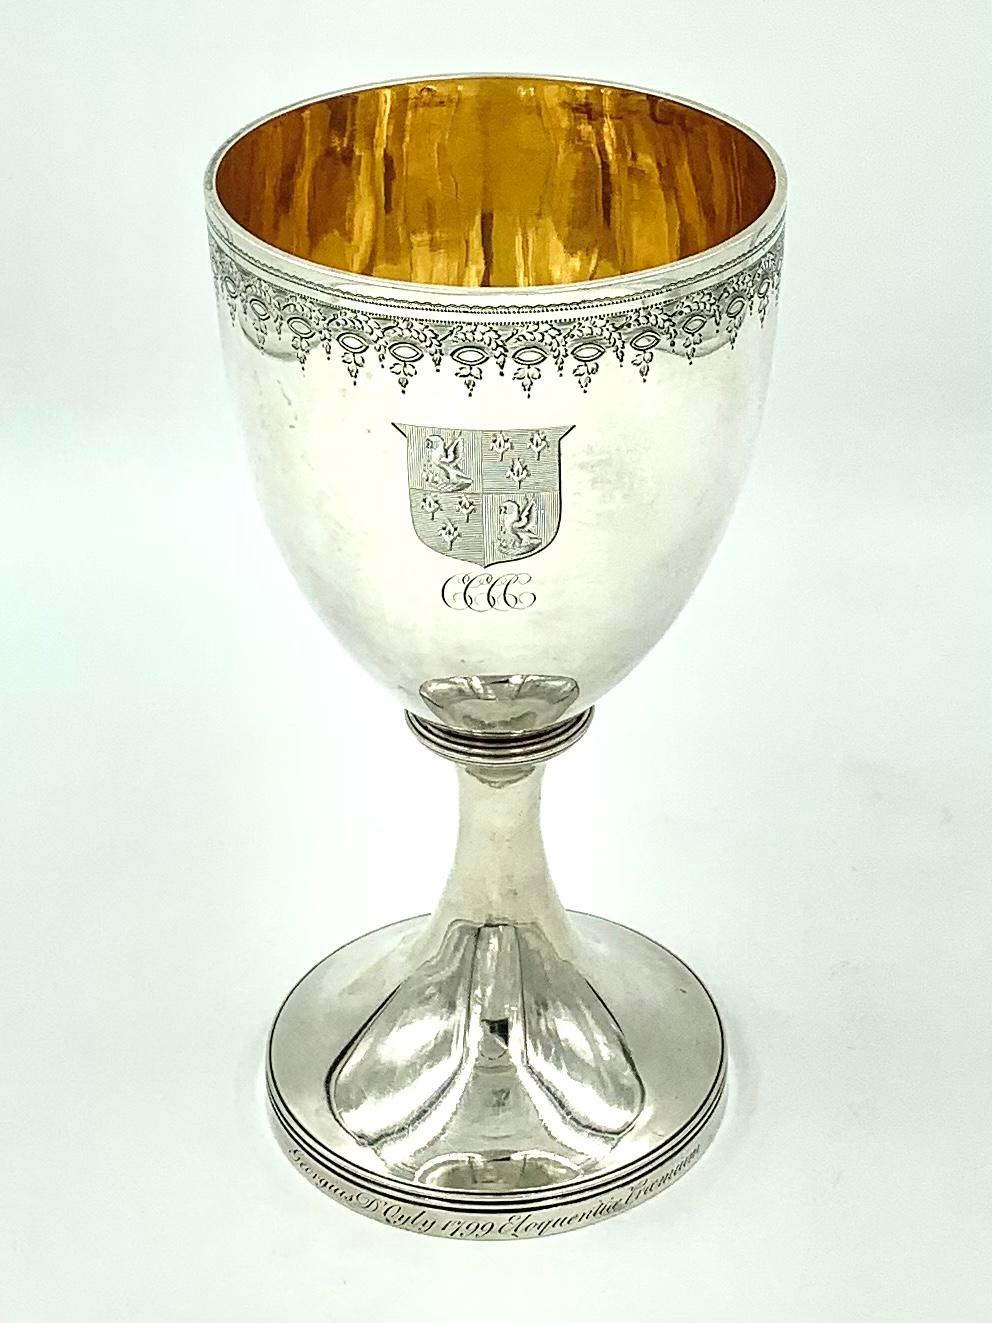 George III Armorial 18th Century English Sterling Silver Chalice John Emes, 1799 1